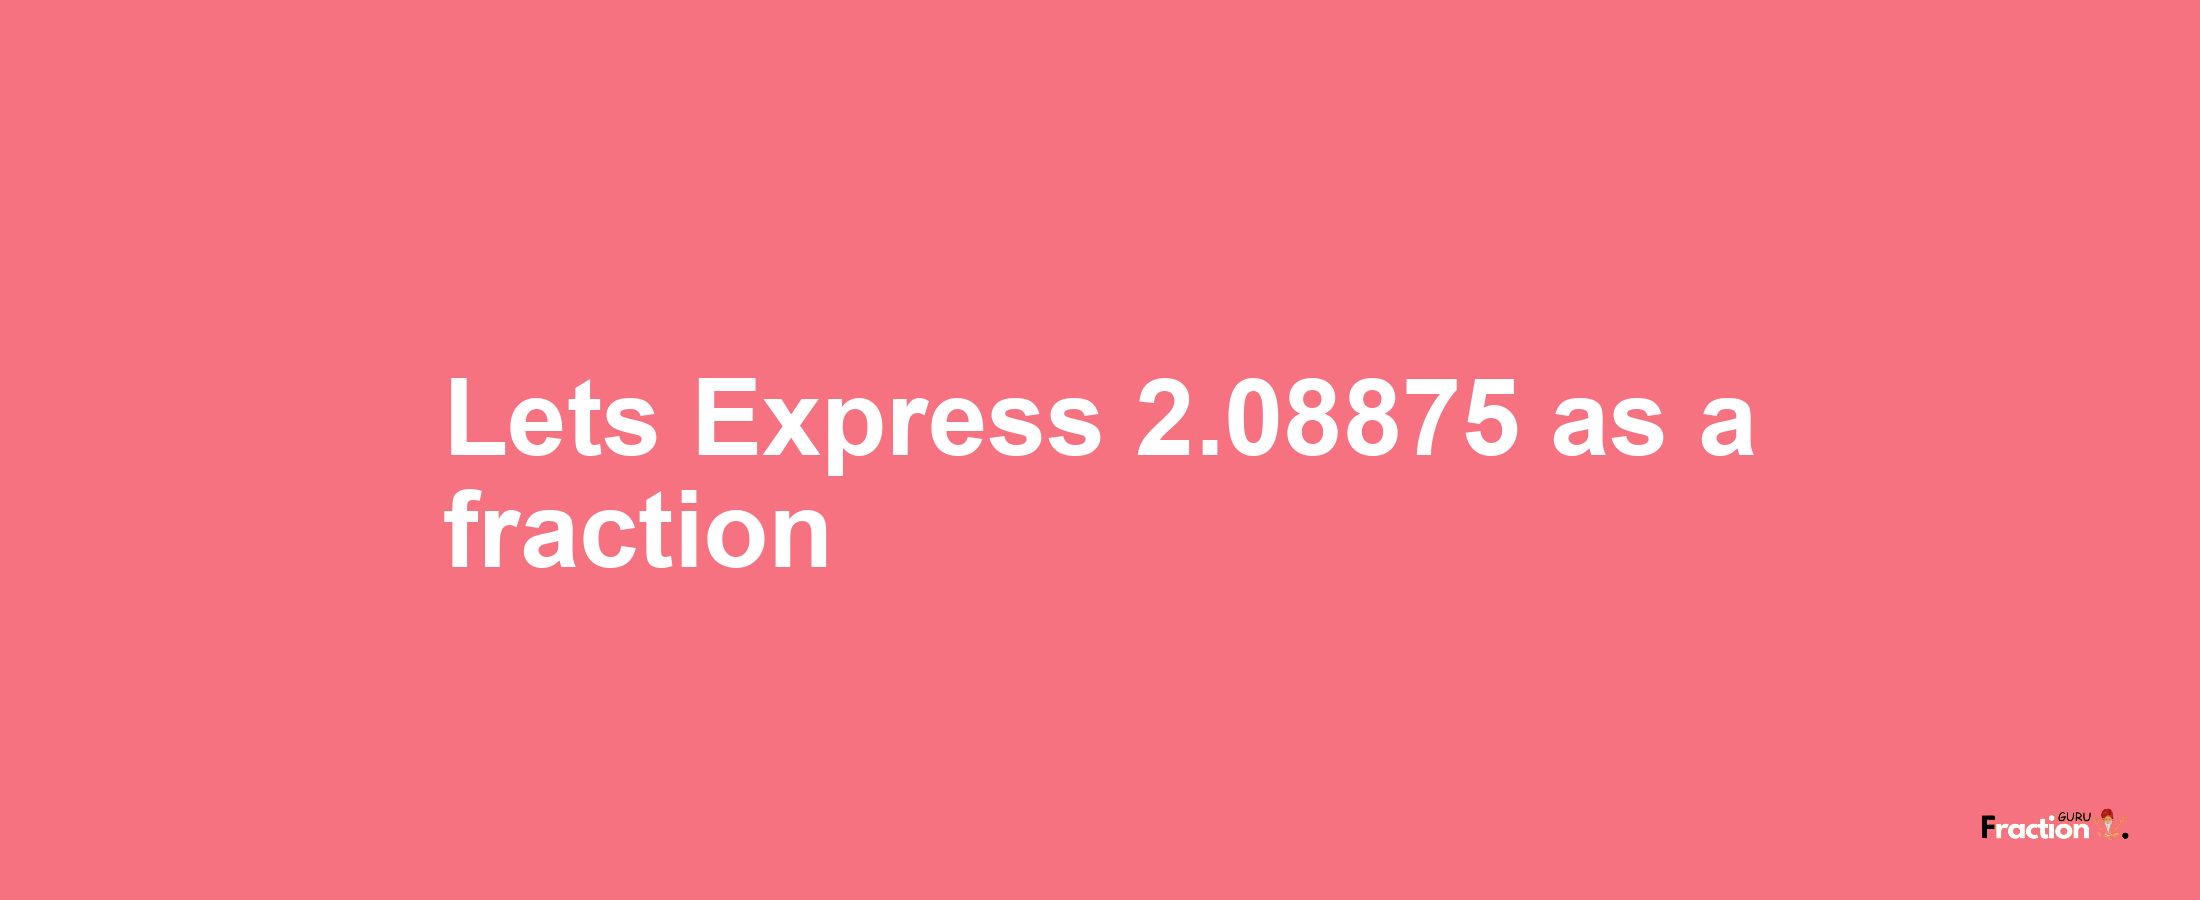 Lets Express 2.08875 as afraction